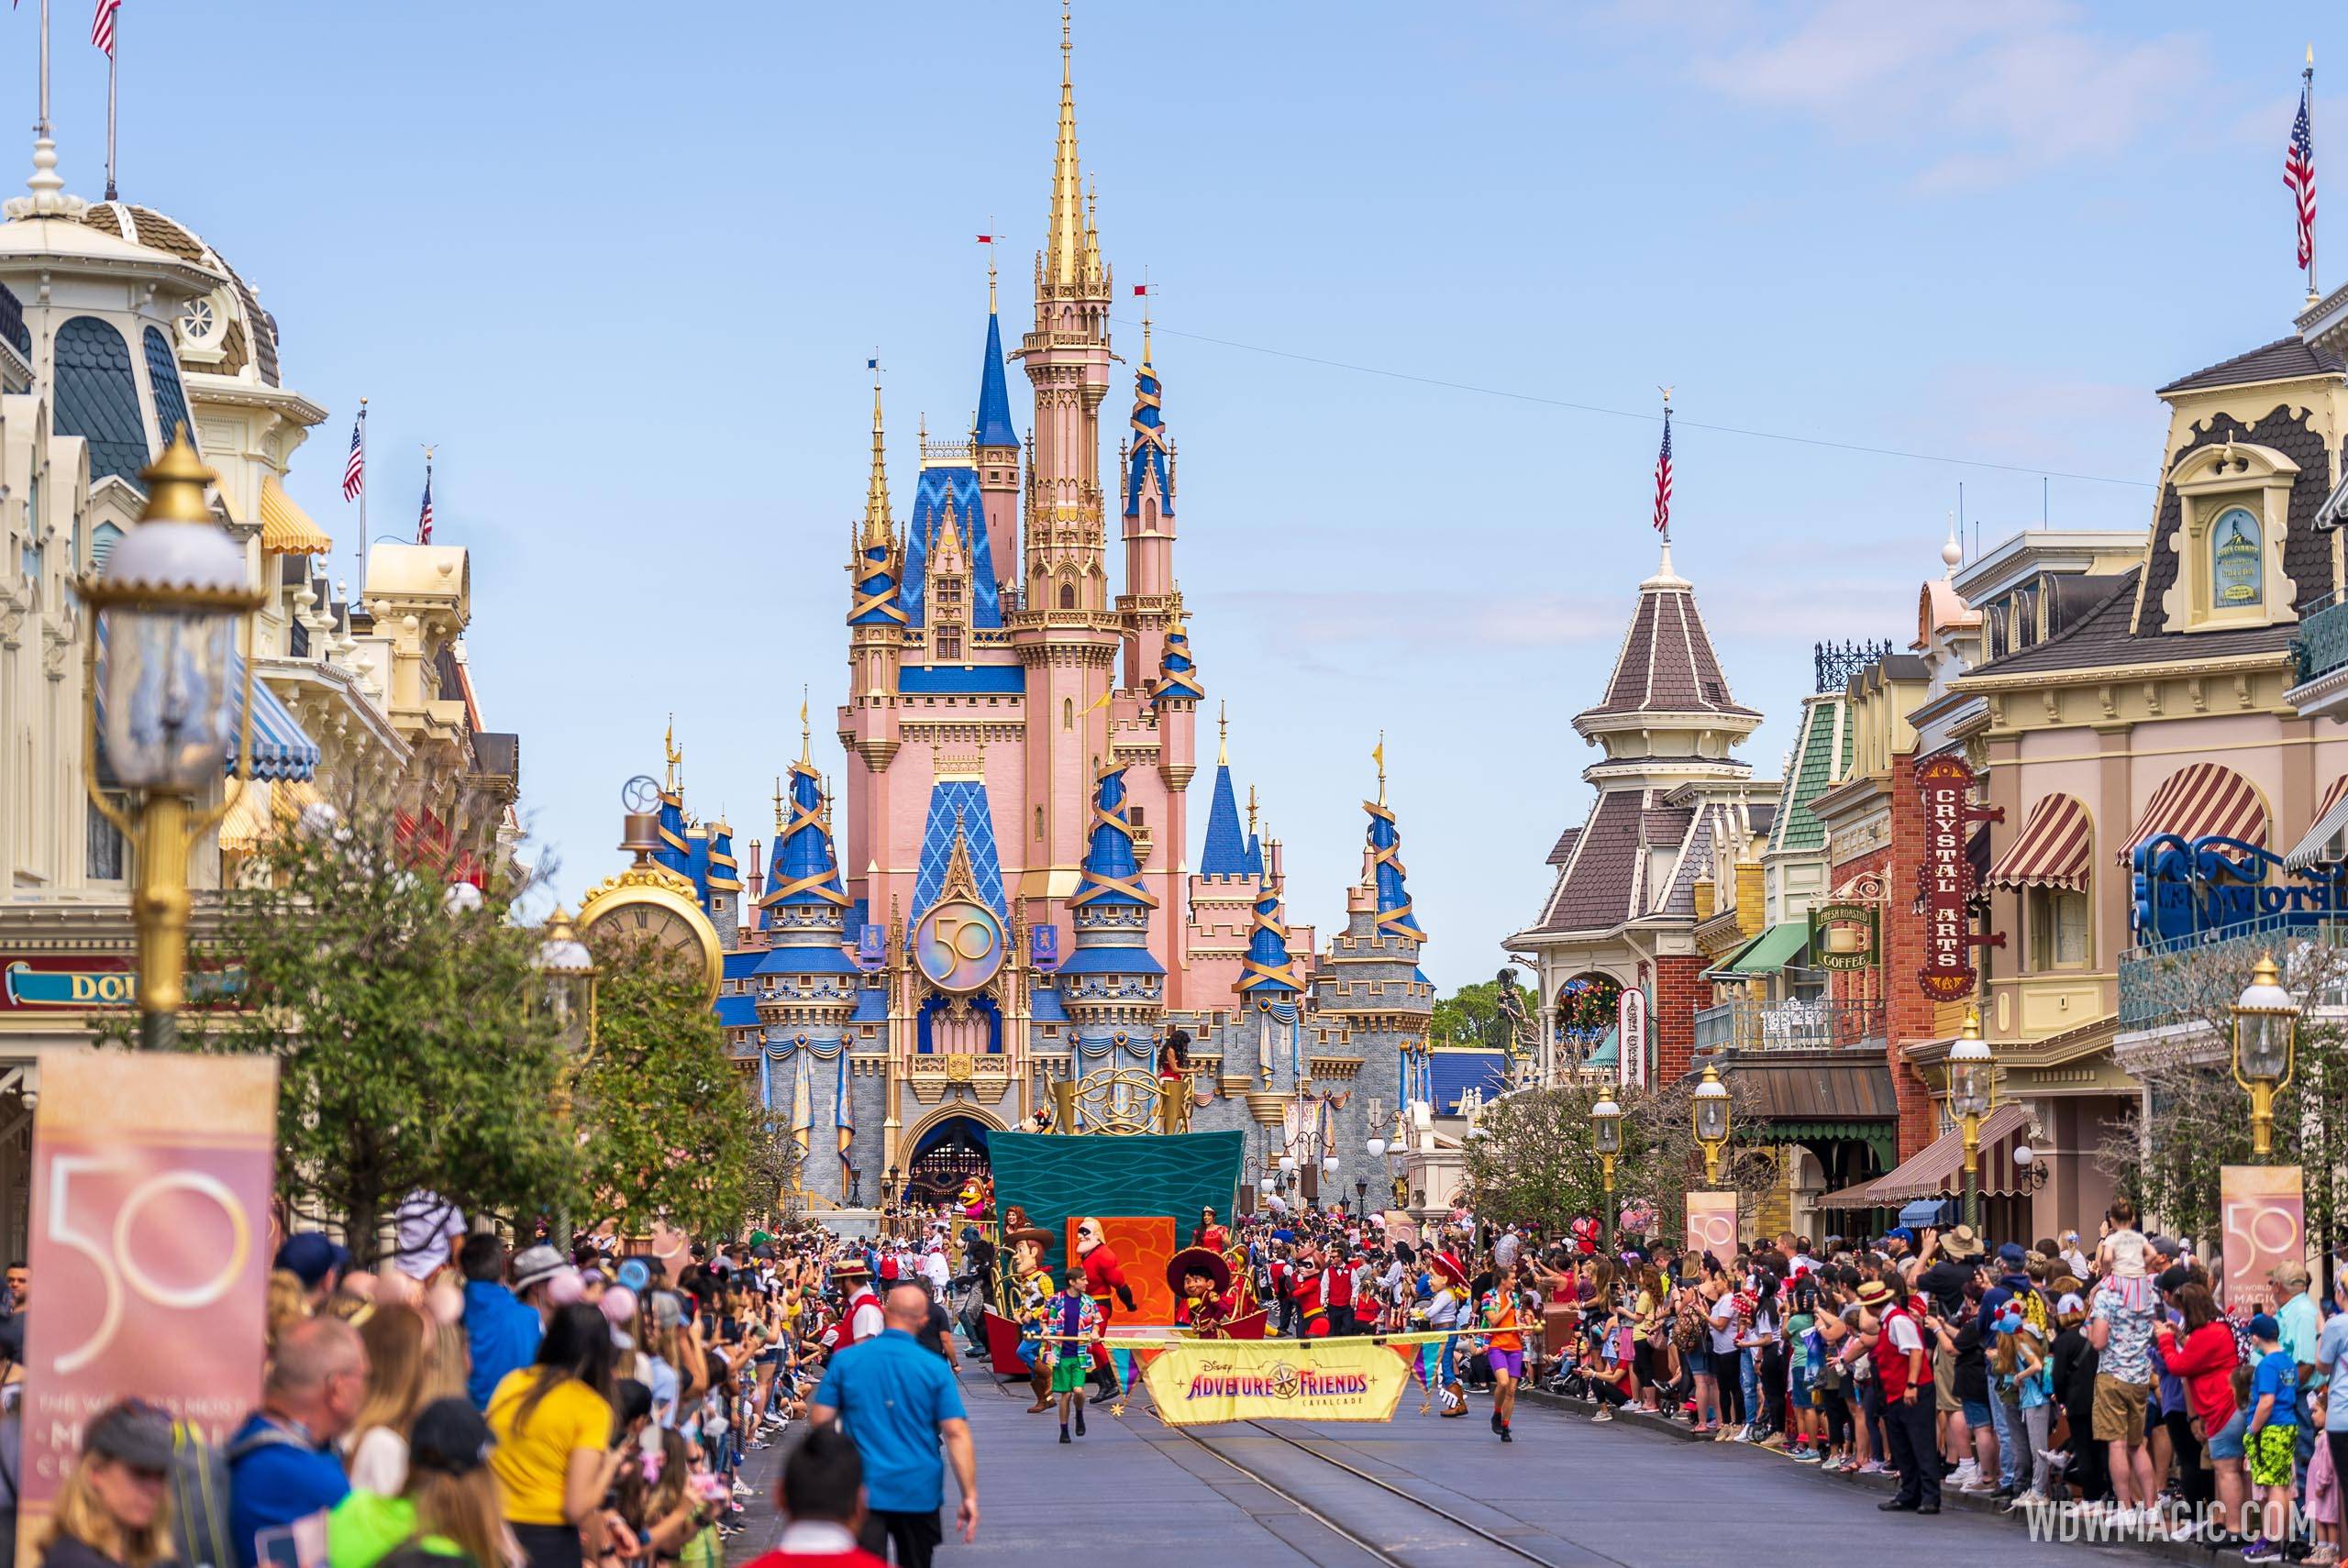 Hours have been extended at Magic Kingdom from February 27 through March 5